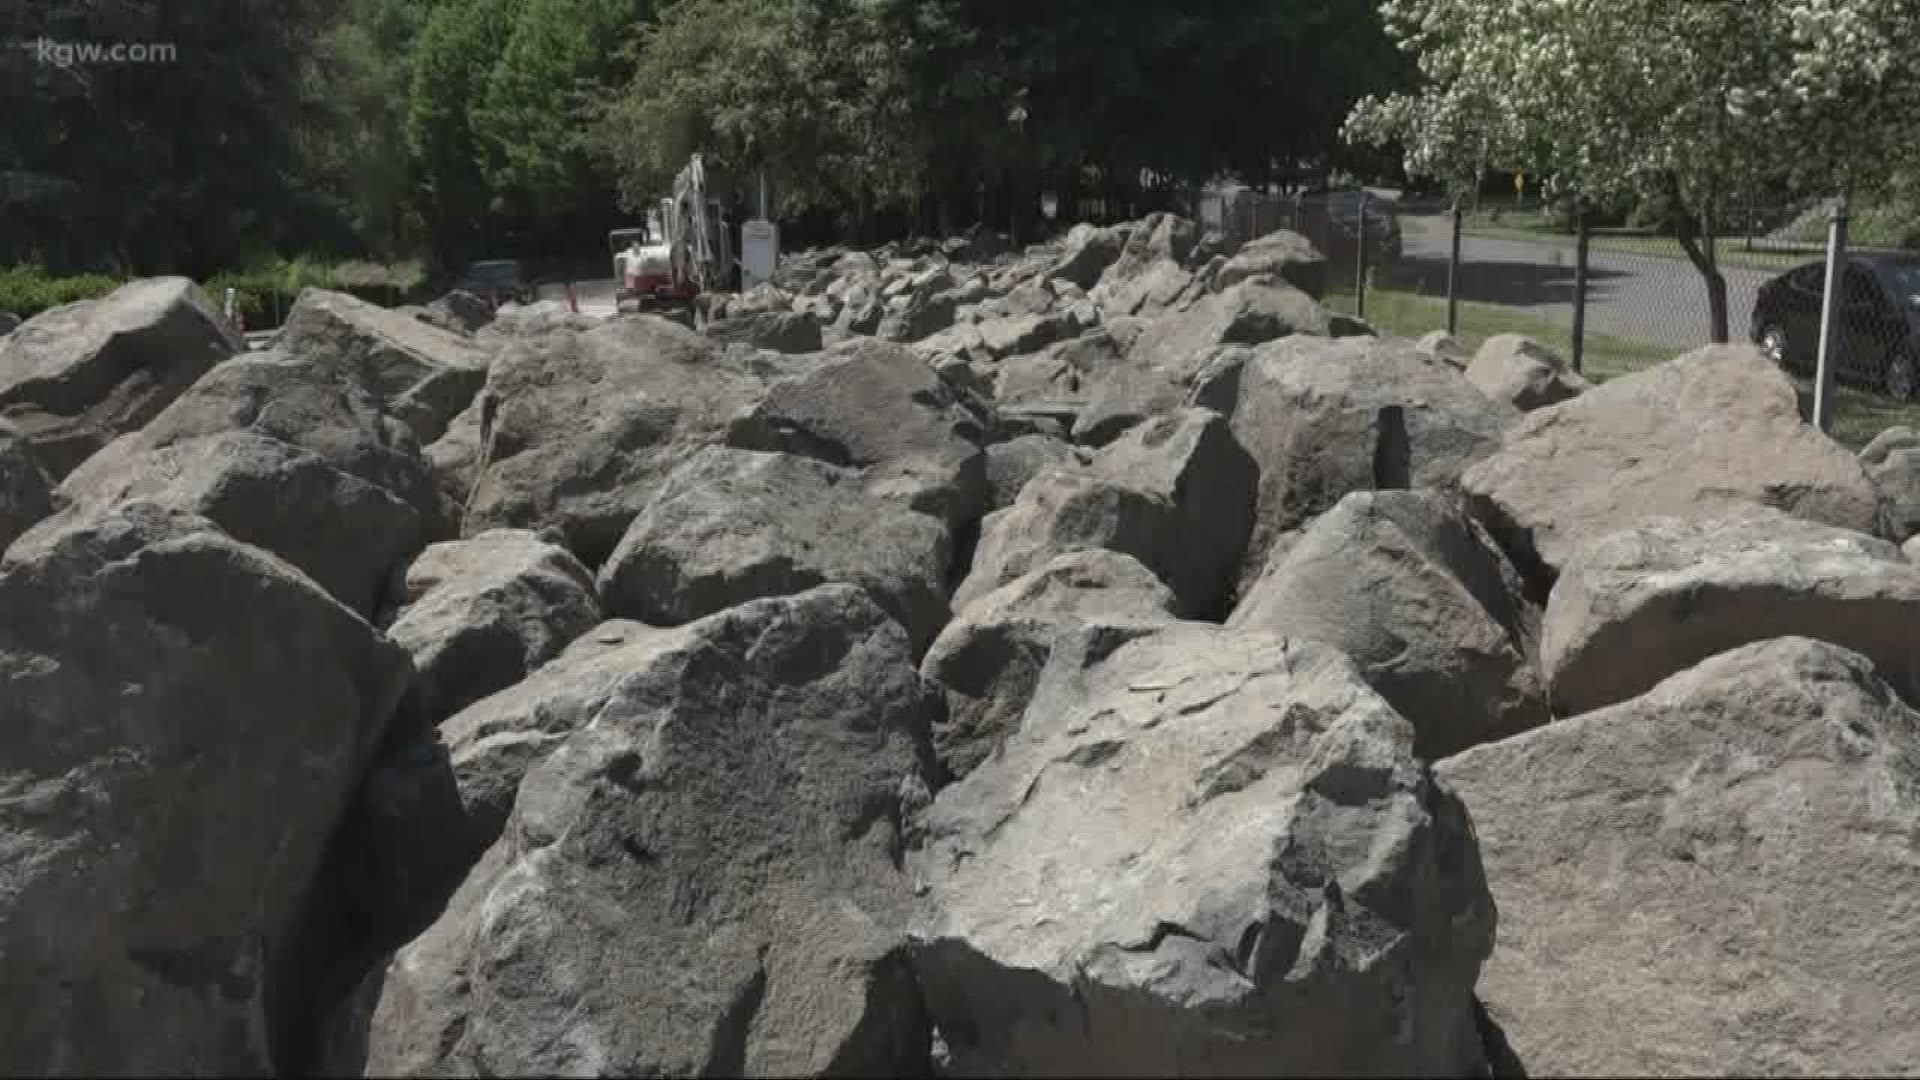 ODOT is replacing rose bushes with boulders.